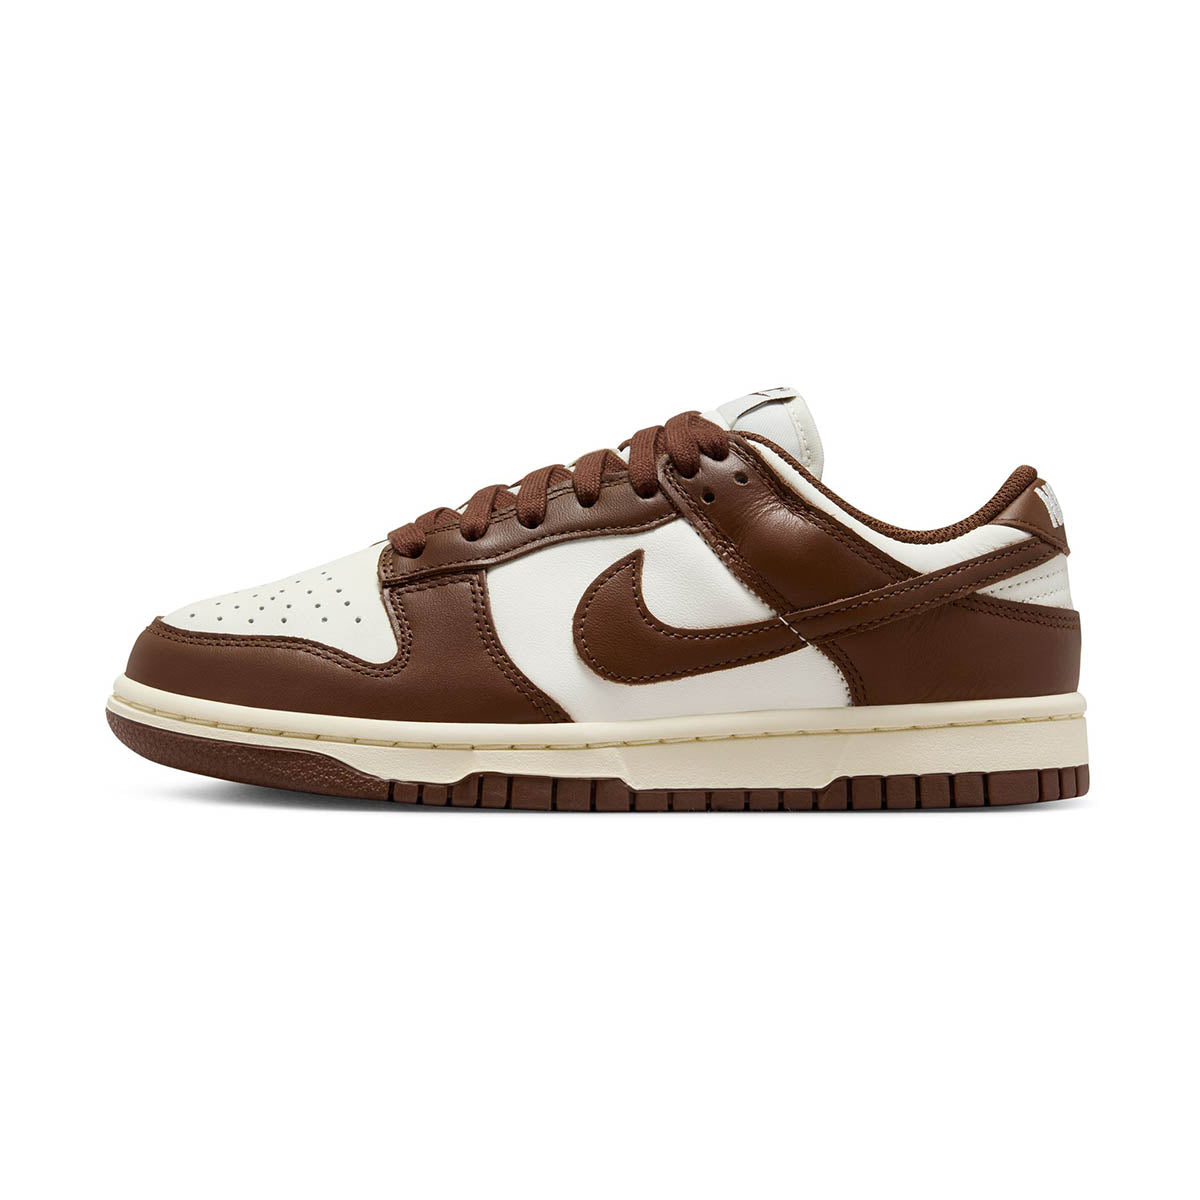 nike dunk low prm animal pack dh7913 200 preview Women's Shoes